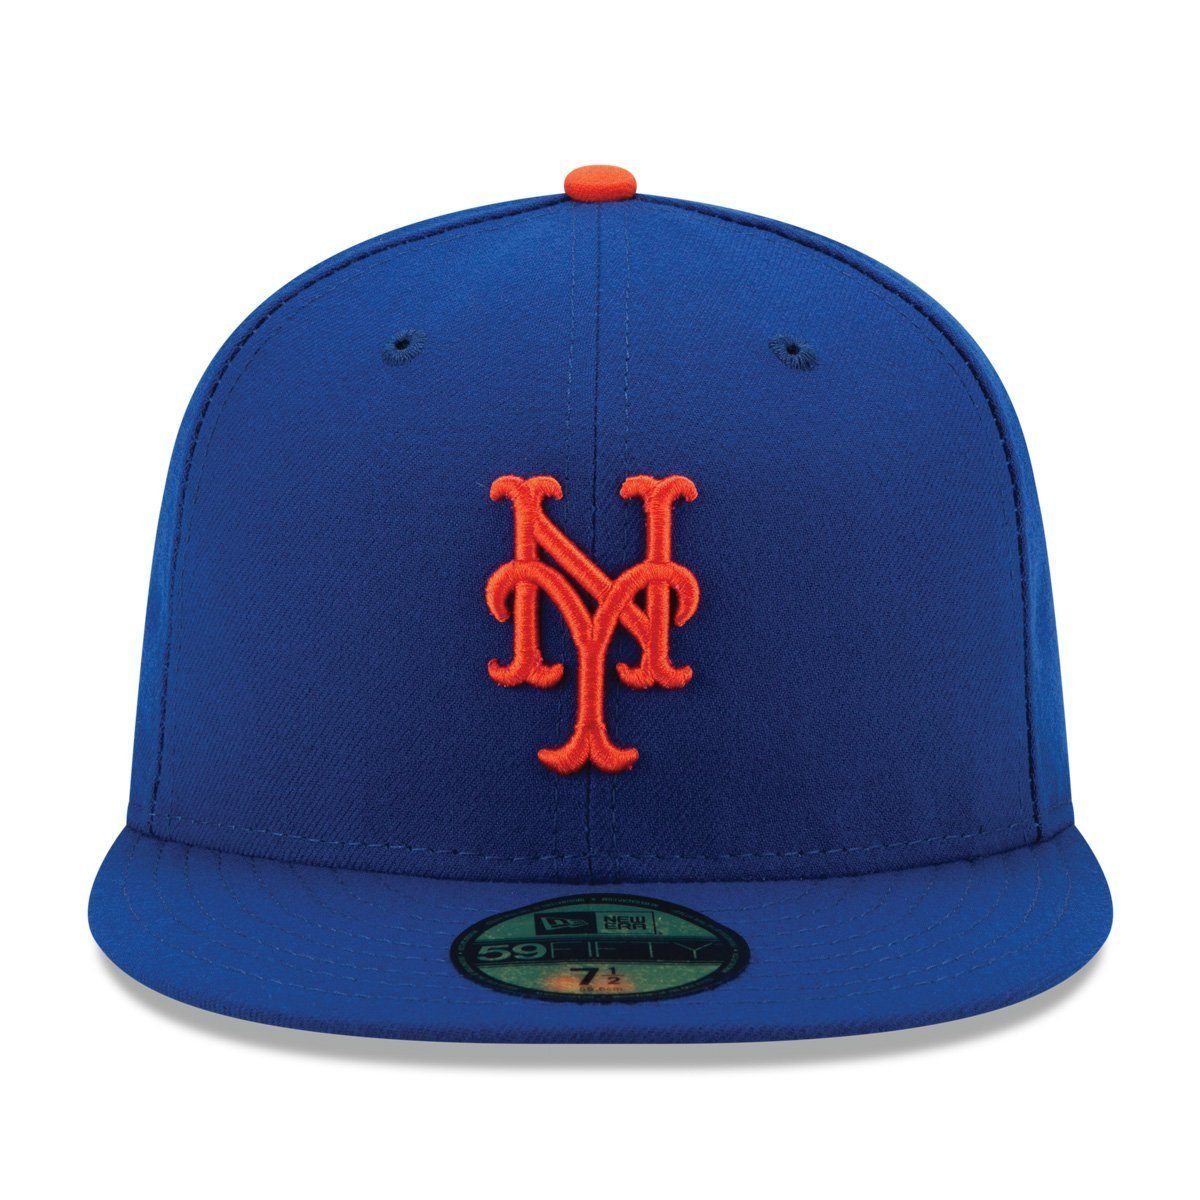 New New Cap Fitted Era ONFIELD York 59Fifty Mets AUTHENTIC